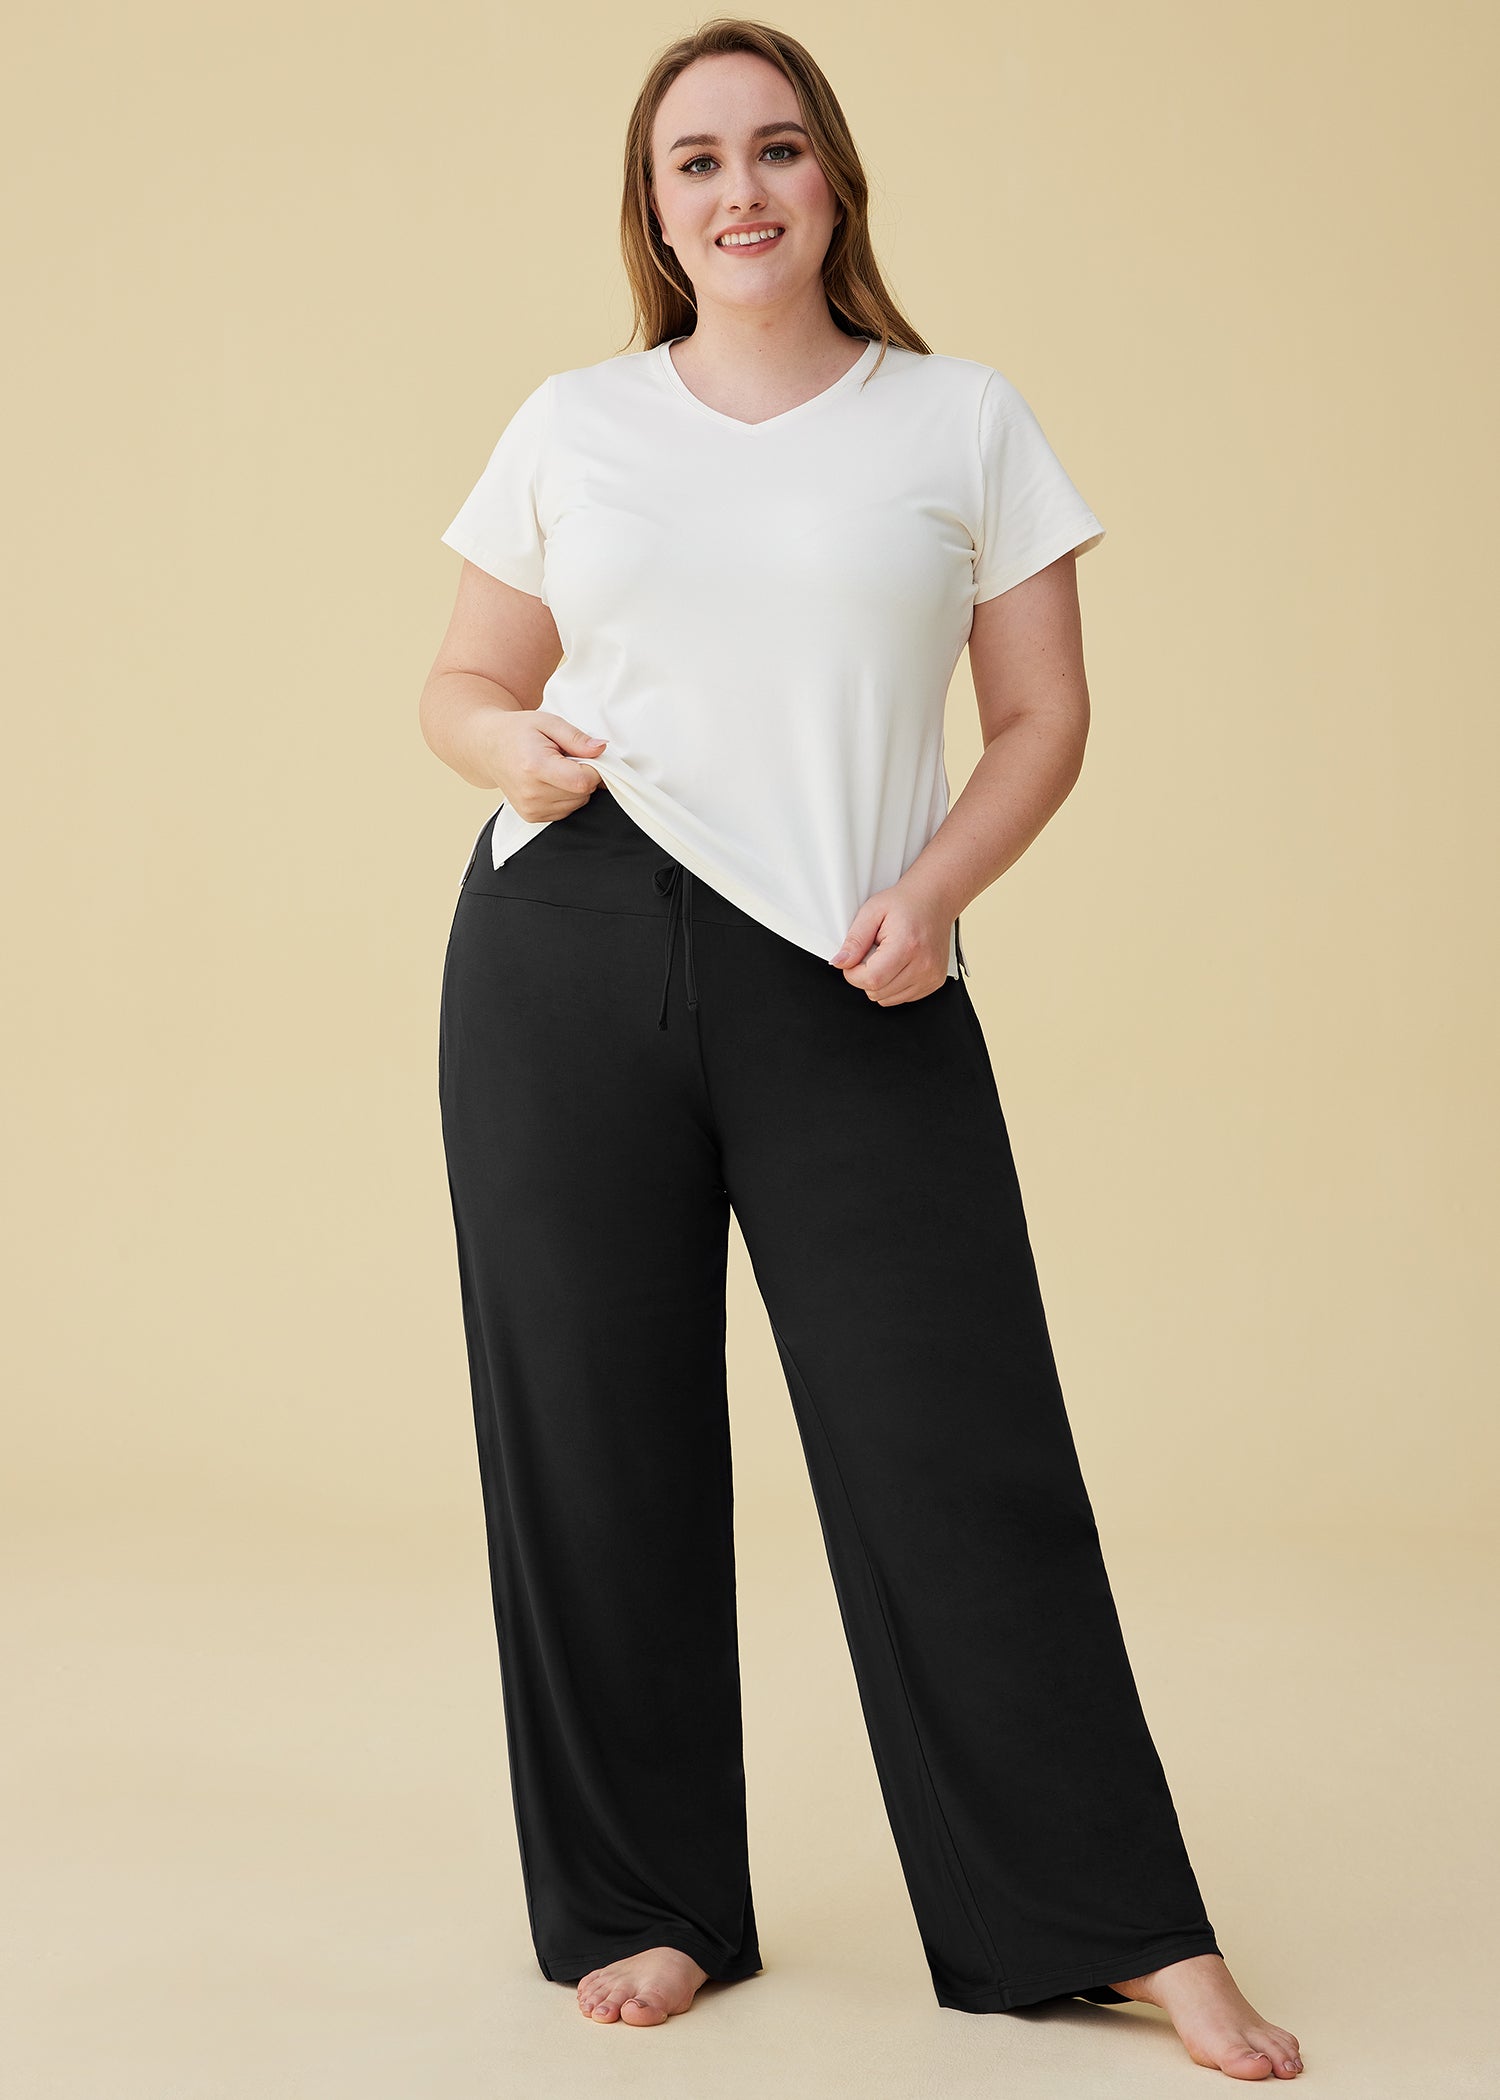 Wholesale top with palazzo pants for Sleep and Well-Being